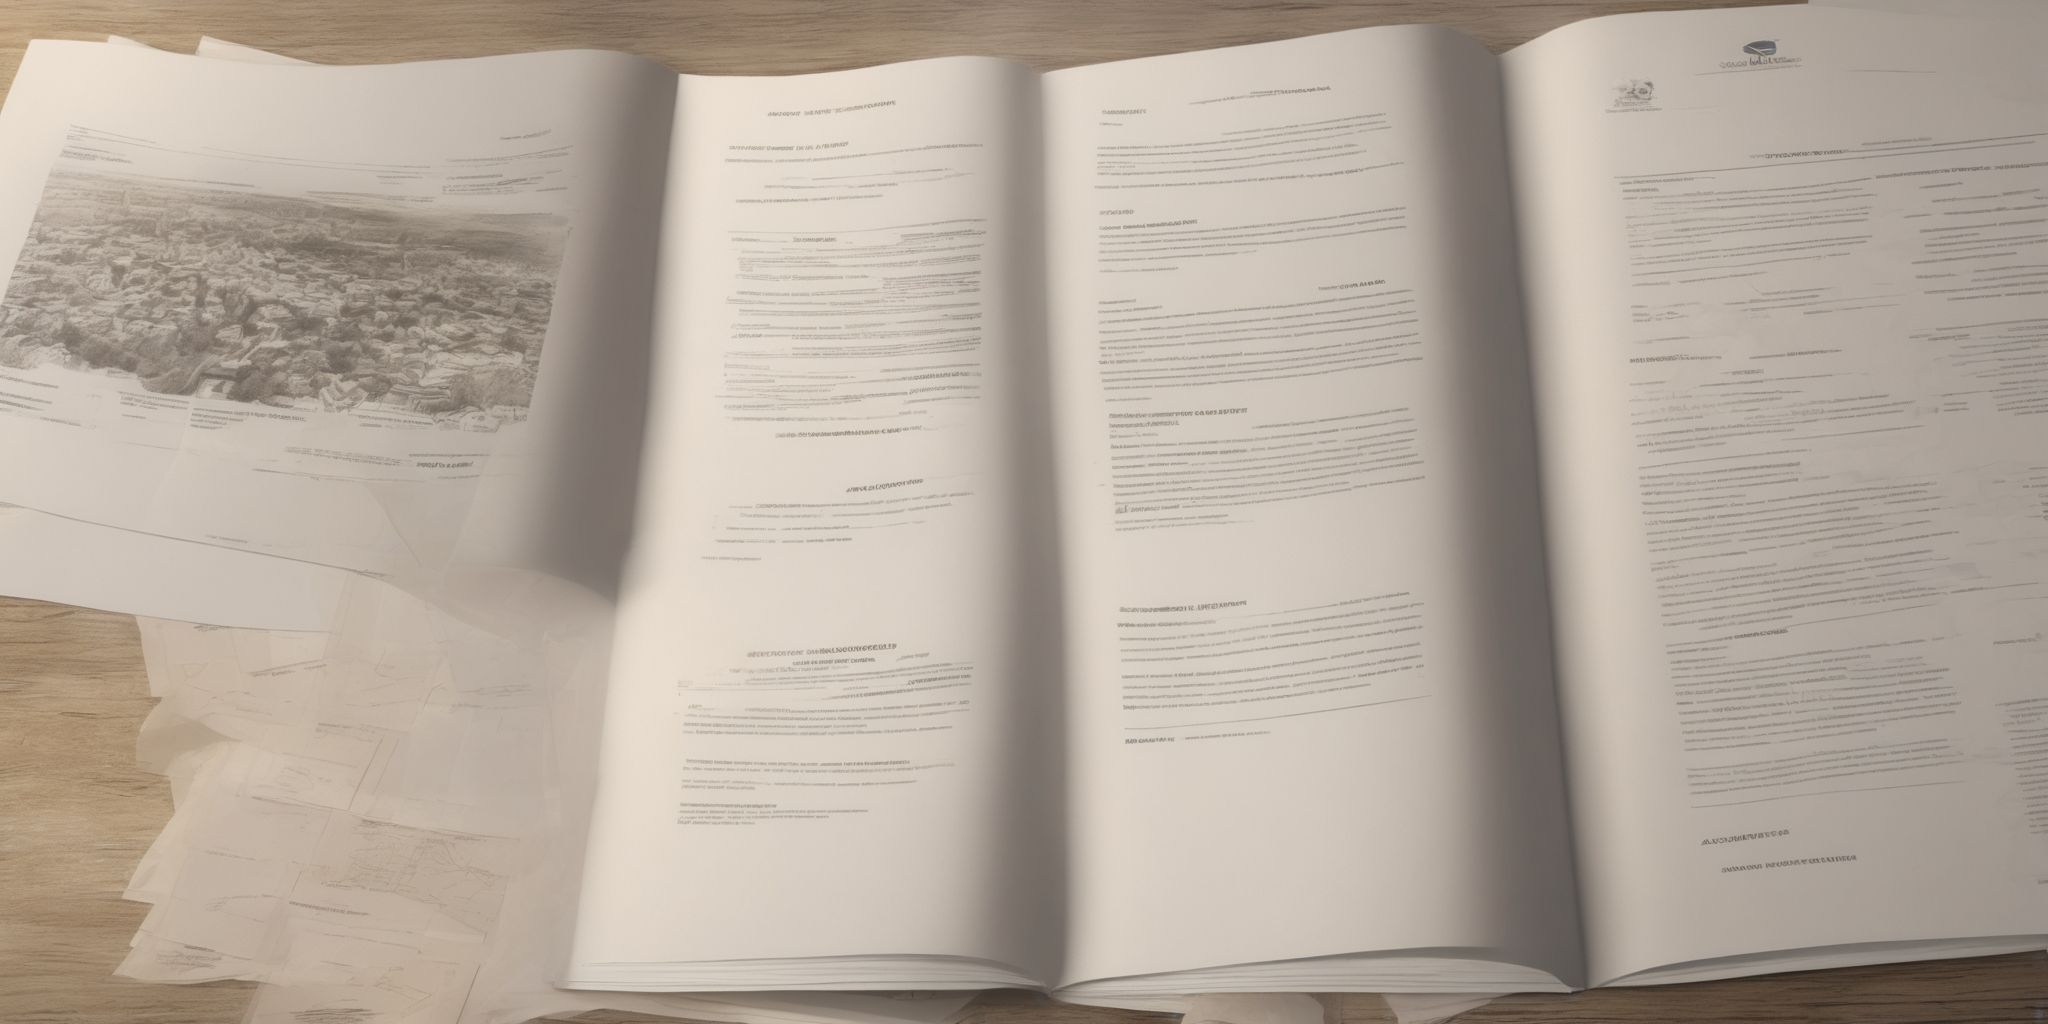 Policy document  in realistic, photographic style